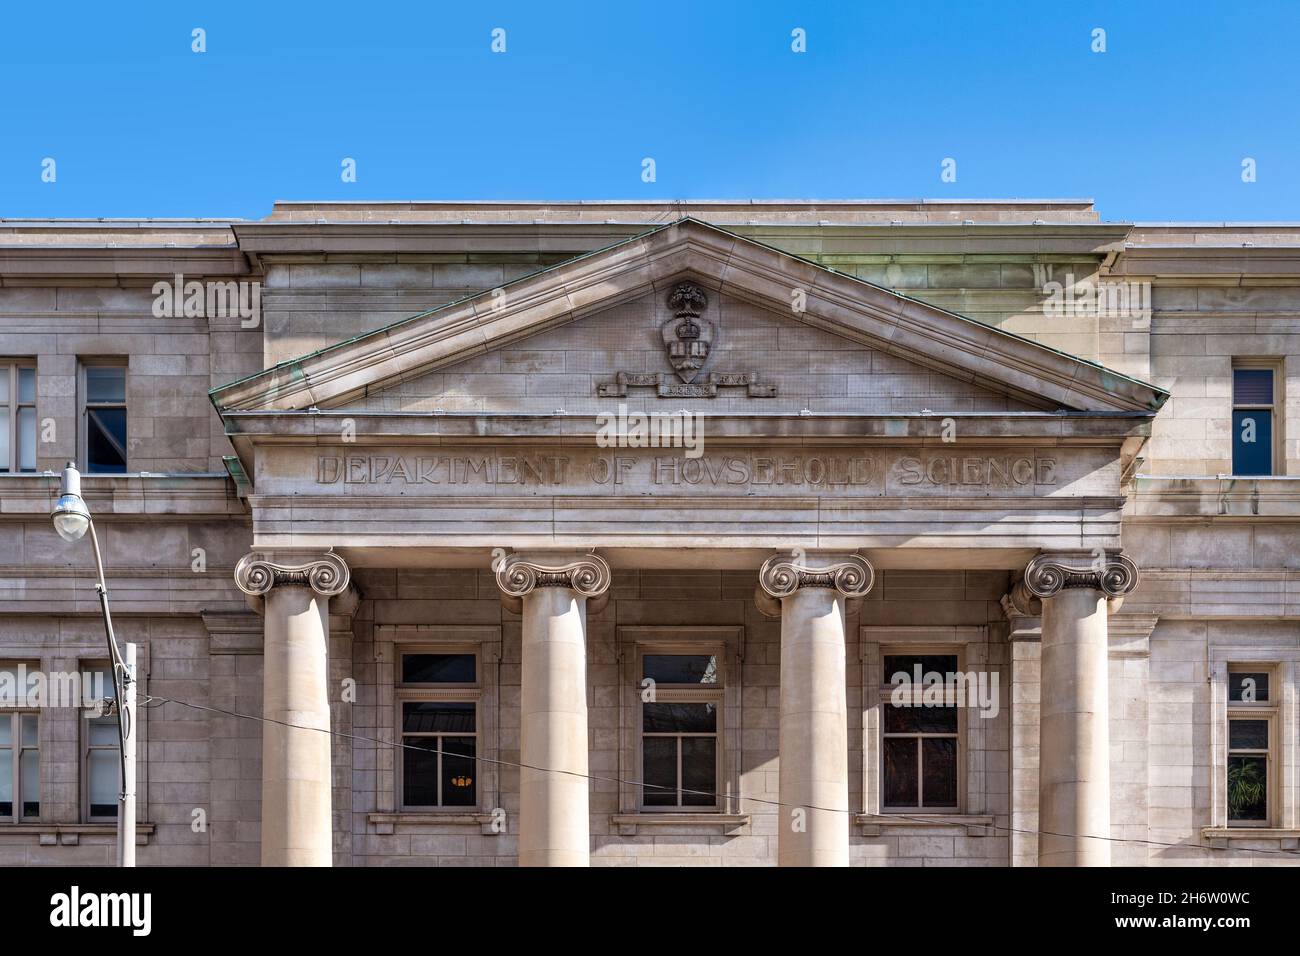 Facade of an old stone building with the inscription 'Department of Household Science' in the downtown district. Nov. 18, 2021 Stock Photo